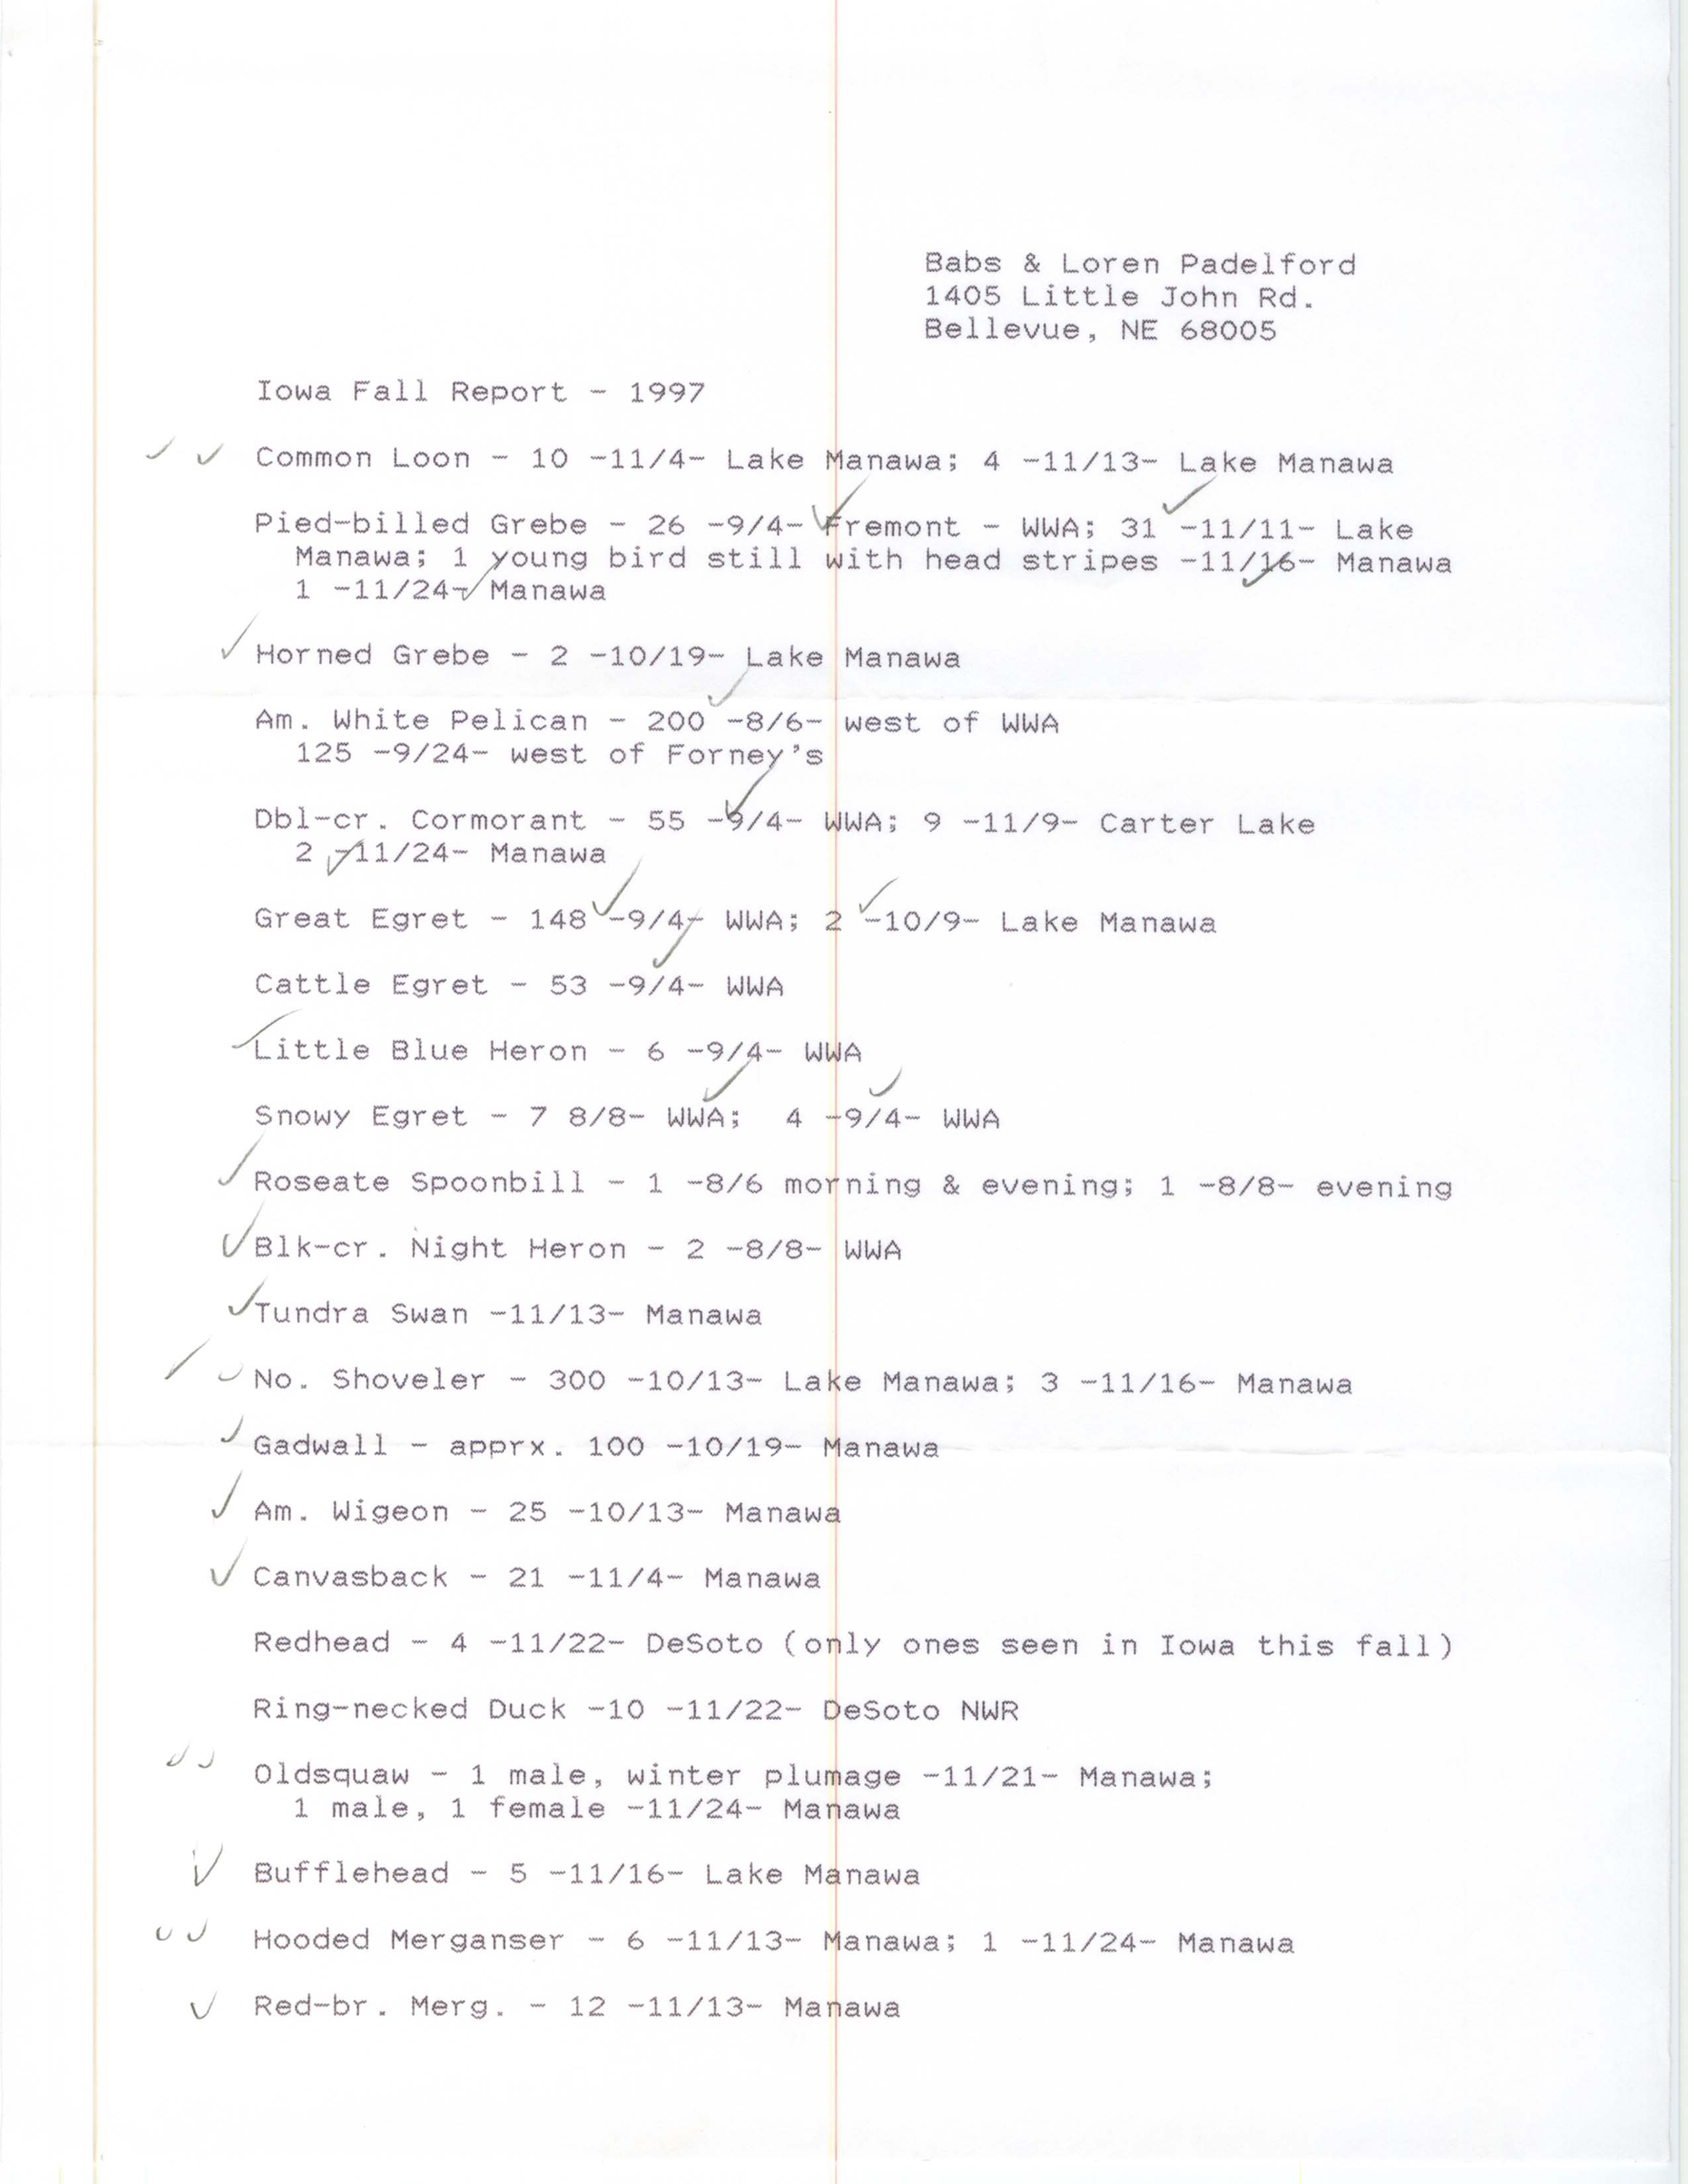 Field notes contributed by Babs Padelford and Loren Padelford, fall 1997